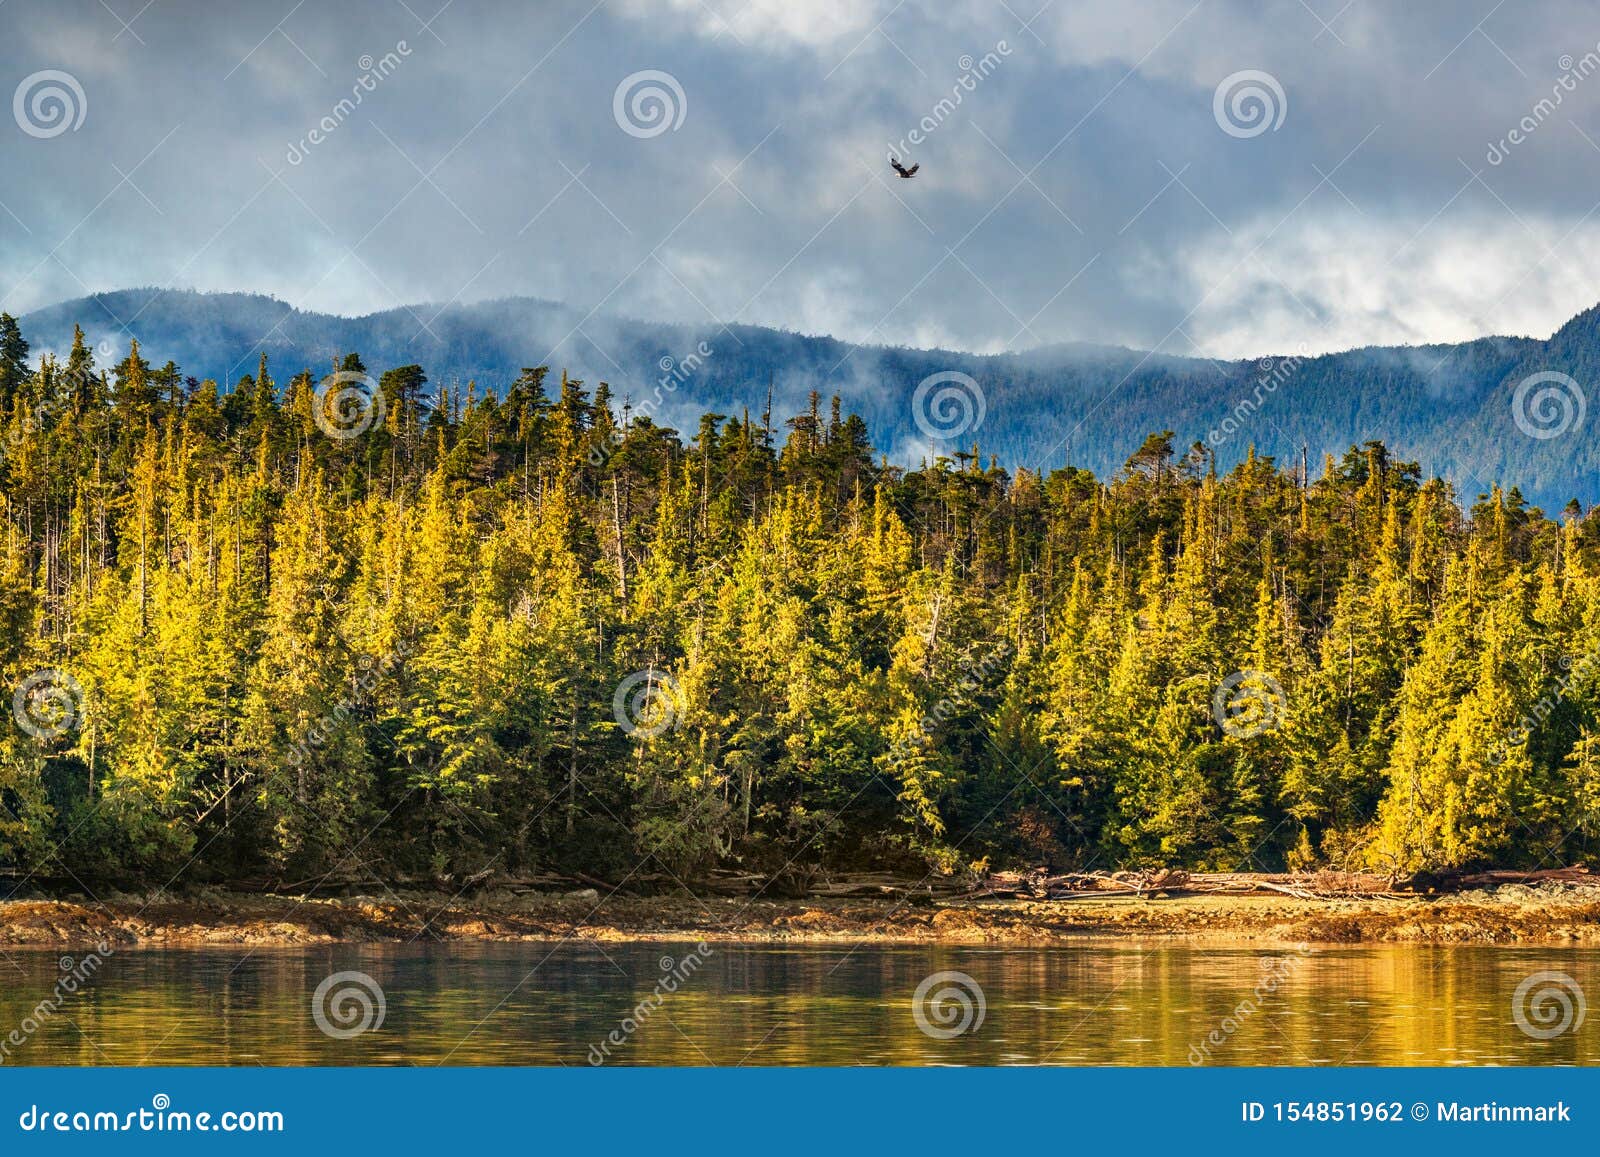 Alaska Wildlife Bird Nature Landscape Shore Background with Bald Eagle Flying Above Pine Trees in Ketchikan, Stock Photo - Image of alaskan, natural: 154851962